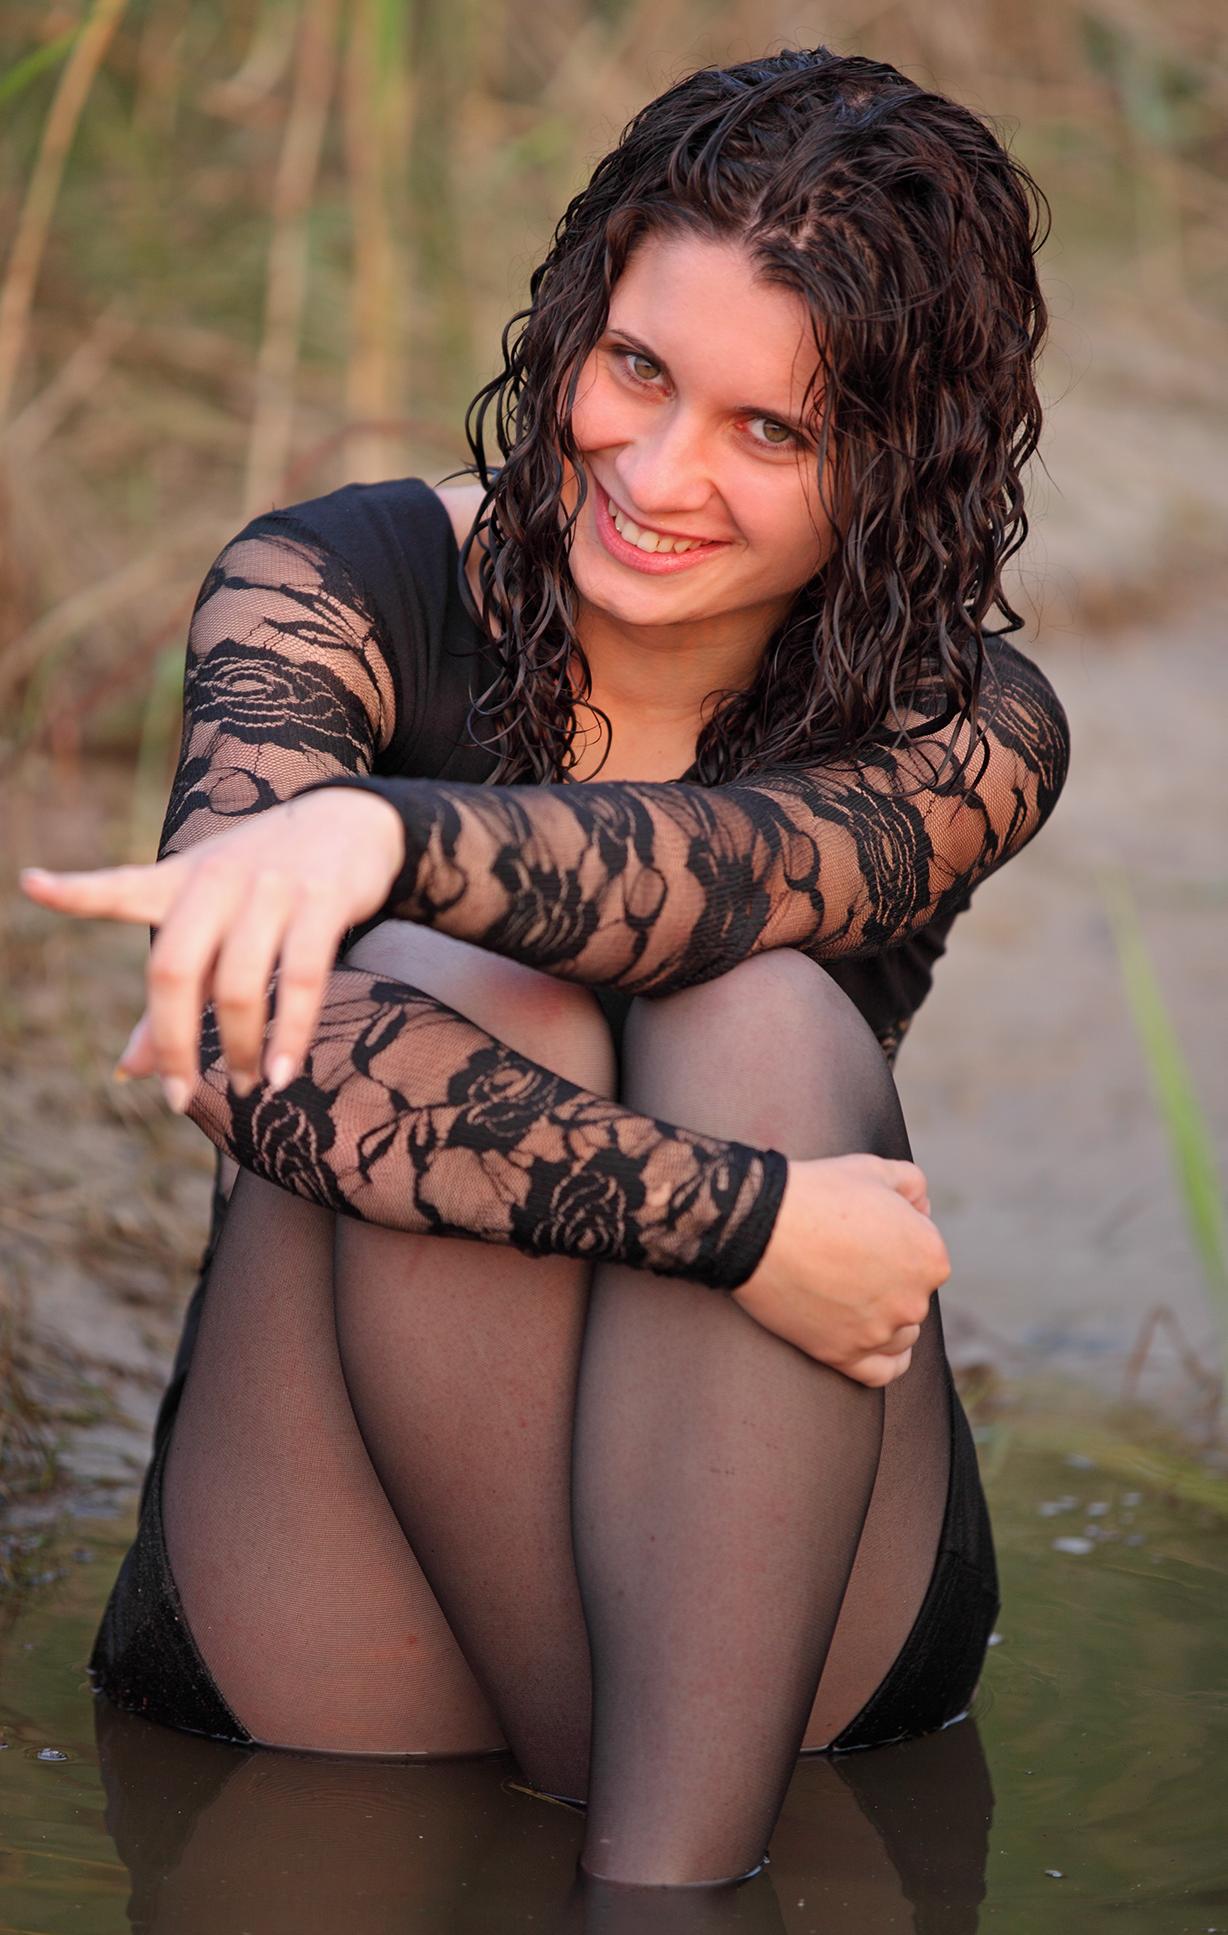 Brunette Young Woman wearing Wet Black Pantyhose and Black Lace Top